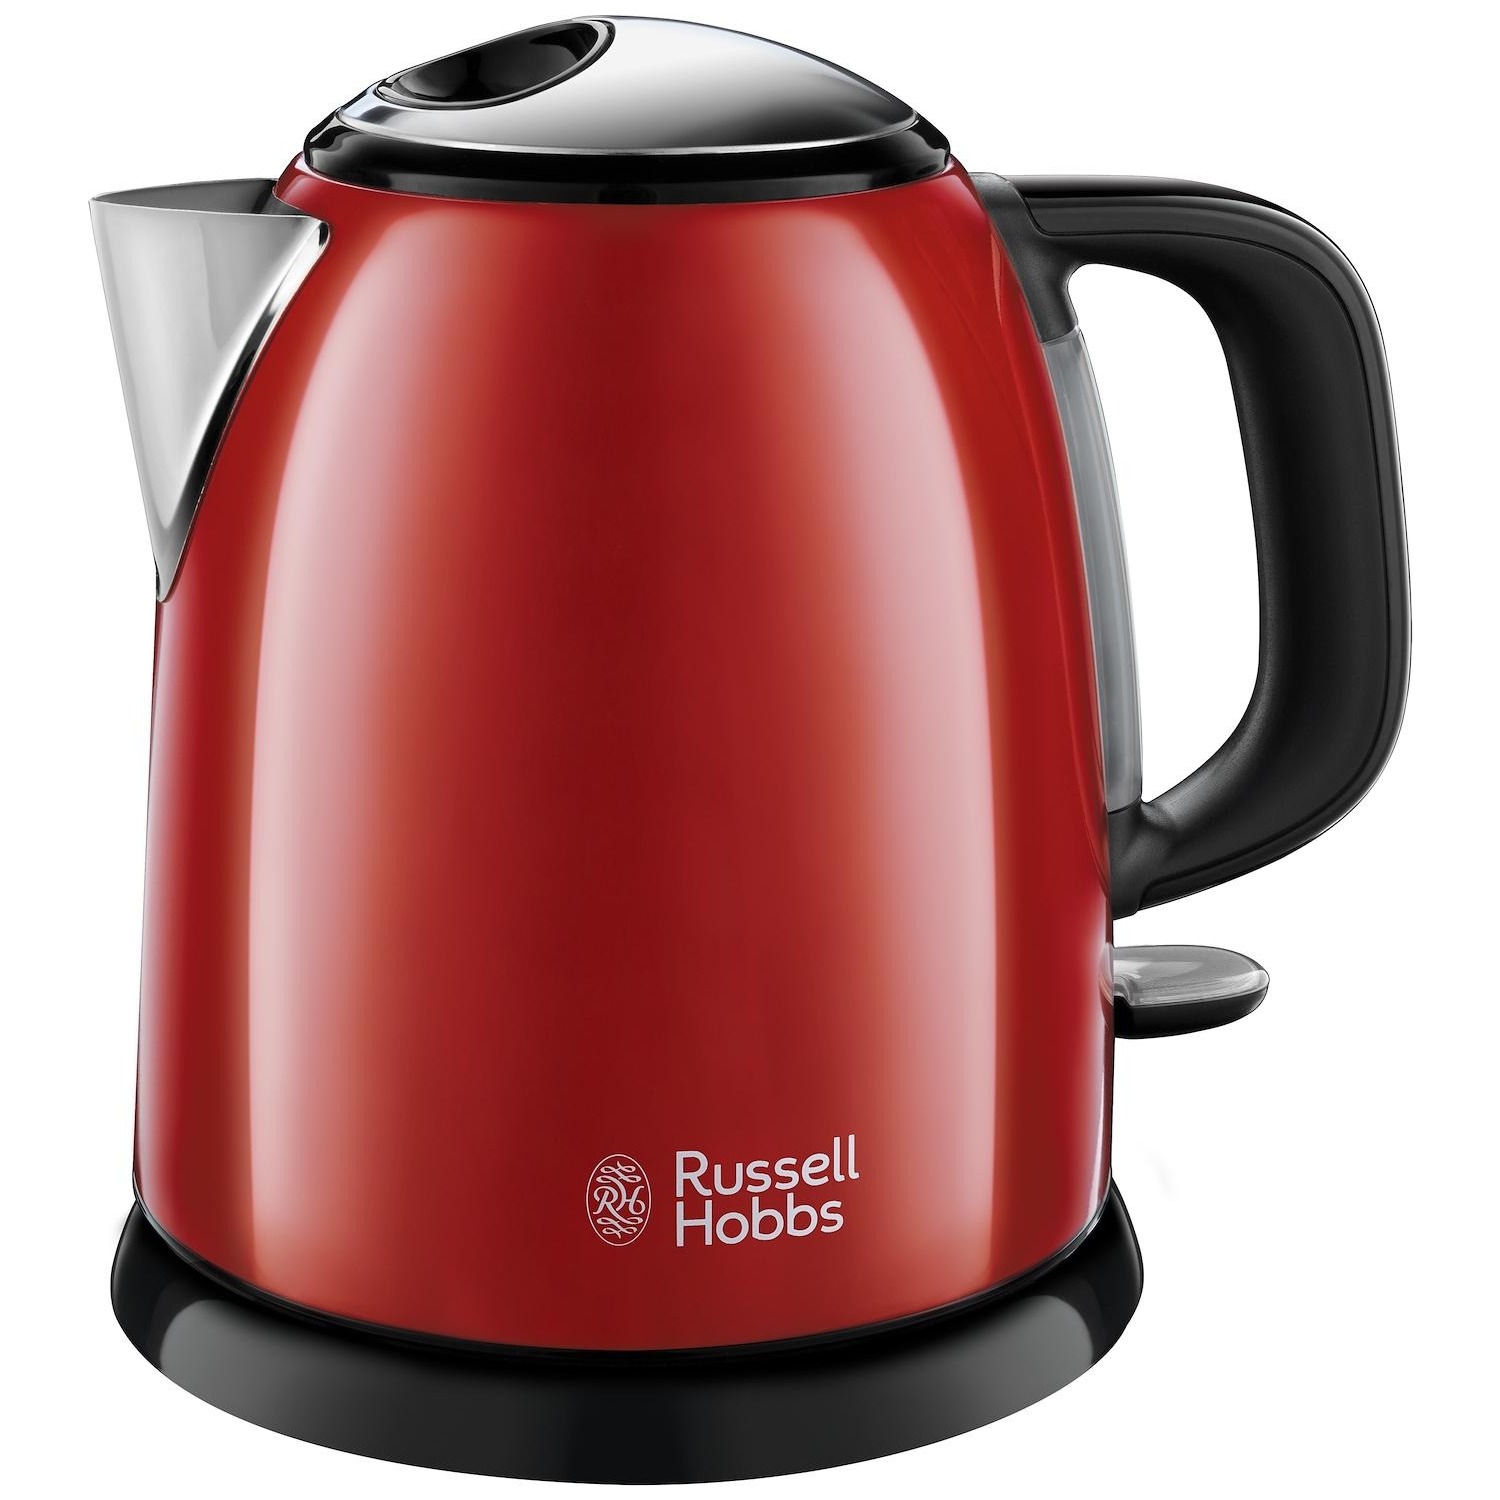 Bollitore Russell Hobbs 24992-70 rosso - DIMOStore